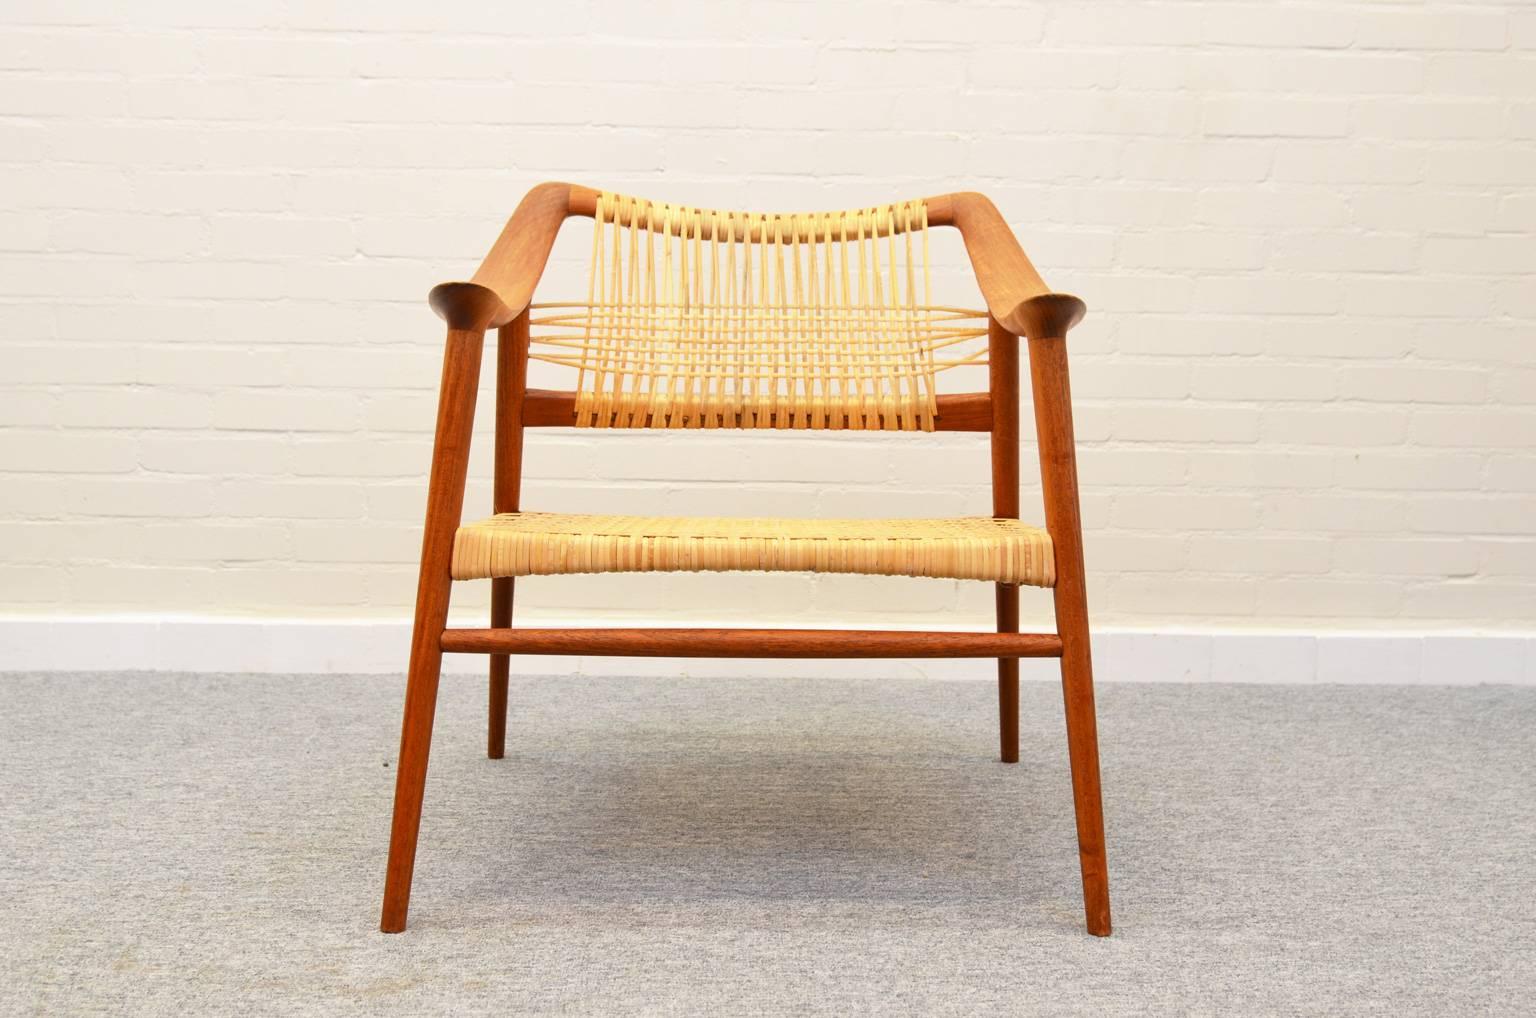 Exceptional armchair designed by Rastad and Relling design office and produced at Gustav Bahus in the mid-1950s. Teak frame and fully restored rattan seating and back.